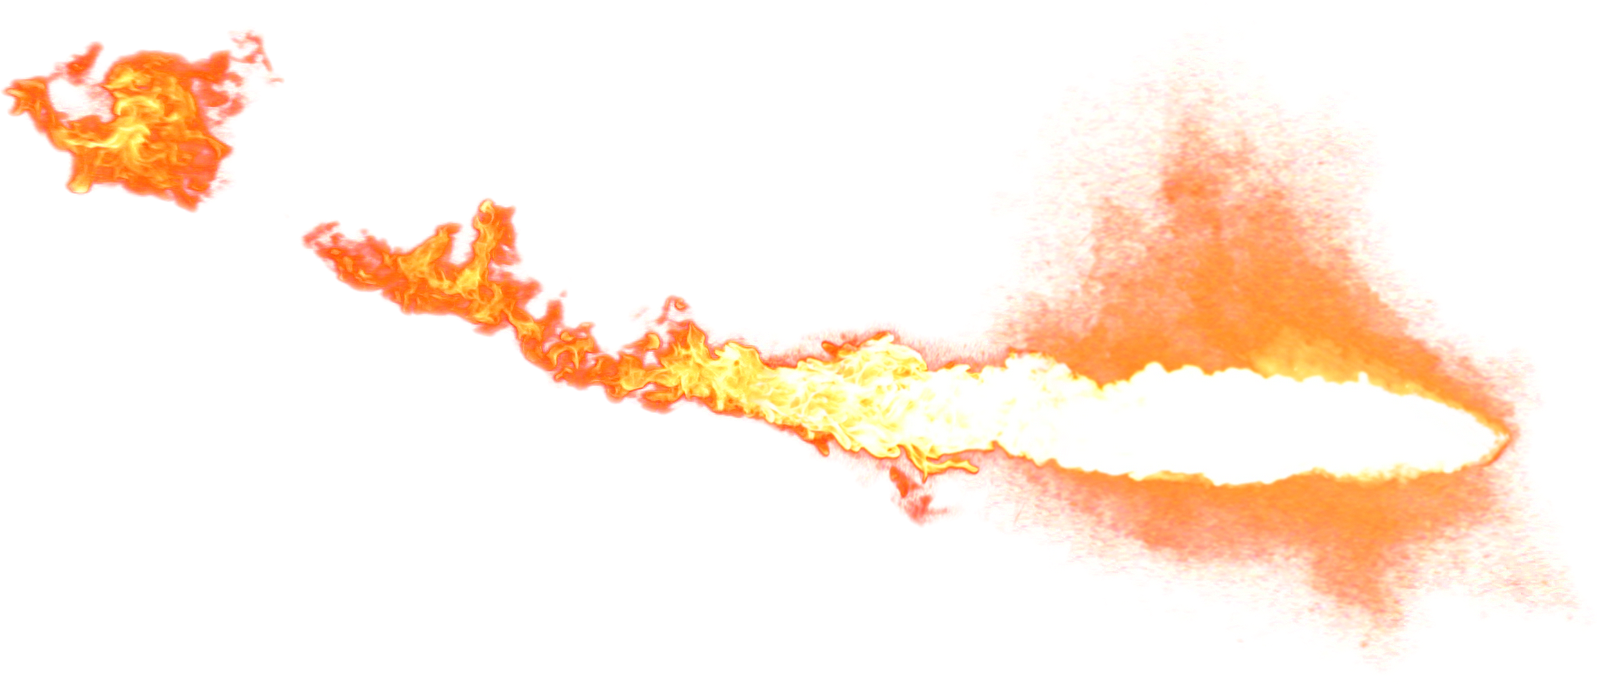 Fireball Vector Background PNG Image